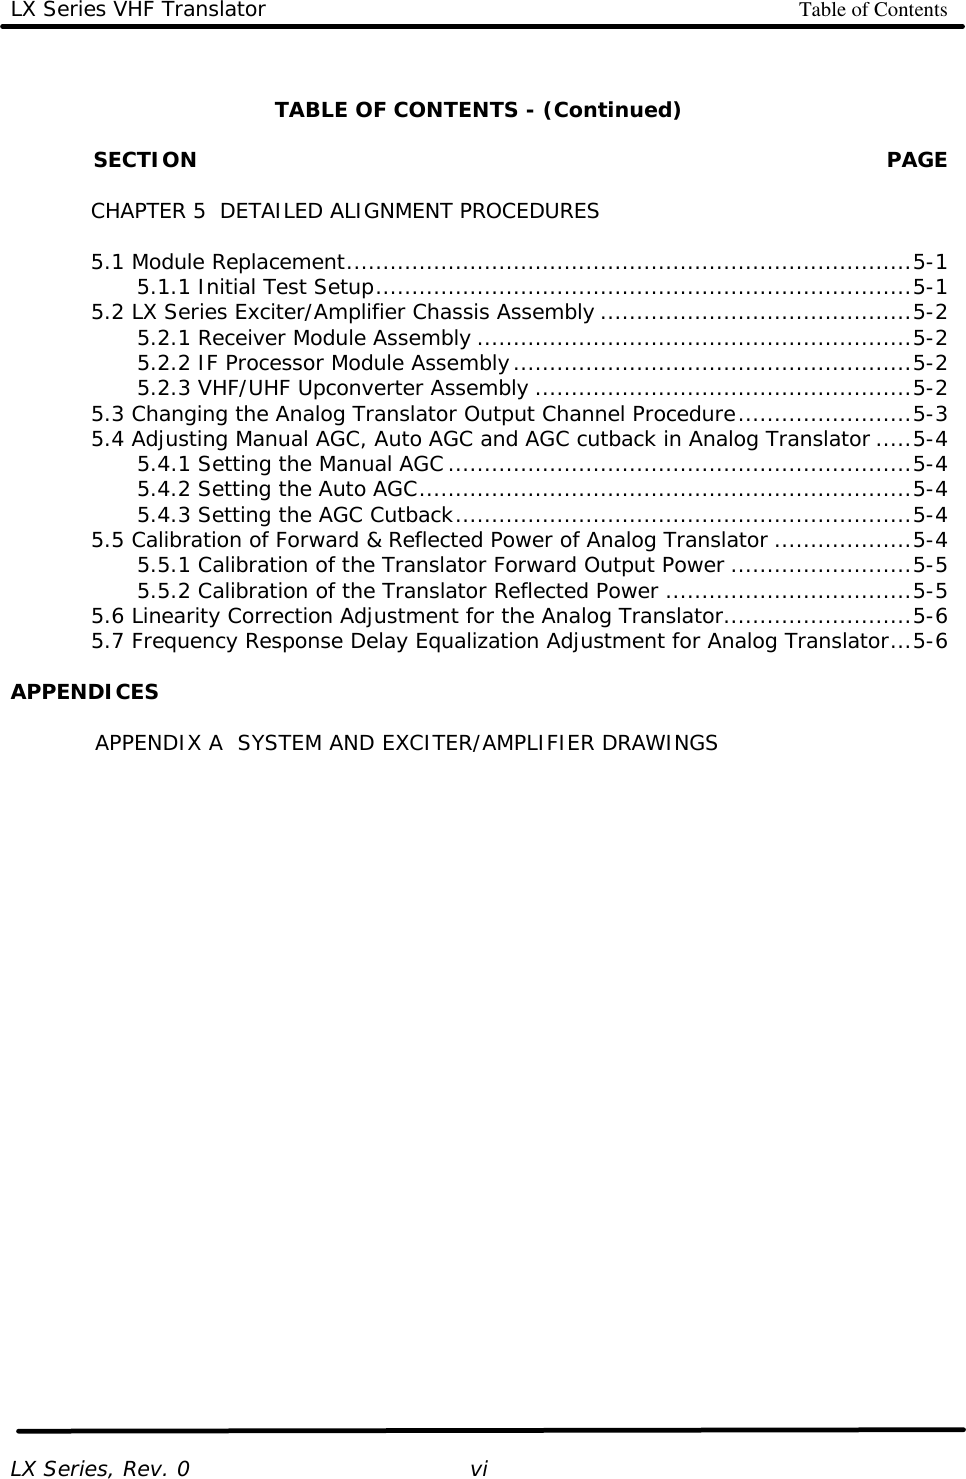 LX Series VHF Translator Table of Contents   LX Series, Rev. 0   vi  TABLE OF CONTENTS - (Continued)              SECTION PAGE       CHAPTER 5  DETAILED ALIGNMENT PROCEDURES   5.1 Module Replacement..............................................................................5-1     5.1.1 Initial Test Setup..........................................................................5-1  5.2 LX Series Exciter/Amplifier Chassis Assembly ...........................................5-2     5.2.1 Receiver Module Assembly ............................................................5-2     5.2.2 IF Processor Module Assembly.......................................................5-2     5.2.3 VHF/UHF Upconverter Assembly ....................................................5-2  5.3 Changing the Analog Translator Output Channel Procedure........................5-3  5.4 Adjusting Manual AGC, Auto AGC and AGC cutback in Analog Translator .....5-4     5.4.1 Setting the Manual AGC................................................................5-4     5.4.2 Setting the Auto AGC....................................................................5-4     5.4.3 Setting the AGC Cutback...............................................................5-4  5.5 Calibration of Forward &amp; Reflected Power of Analog Translator ...................5-4     5.5.1 Calibration of the Translator Forward Output Power .........................5-5     5.5.2 Calibration of the Translator Reflected Power ..................................5-5  5.6 Linearity Correction Adjustment for the Analog Translator..........................5-6  5.7 Frequency Response Delay Equalization Adjustment for Analog Translator...5-6  APPENDICES  APPENDIX A  SYSTEM AND EXCITER/AMPLIFIER DRAWINGS  